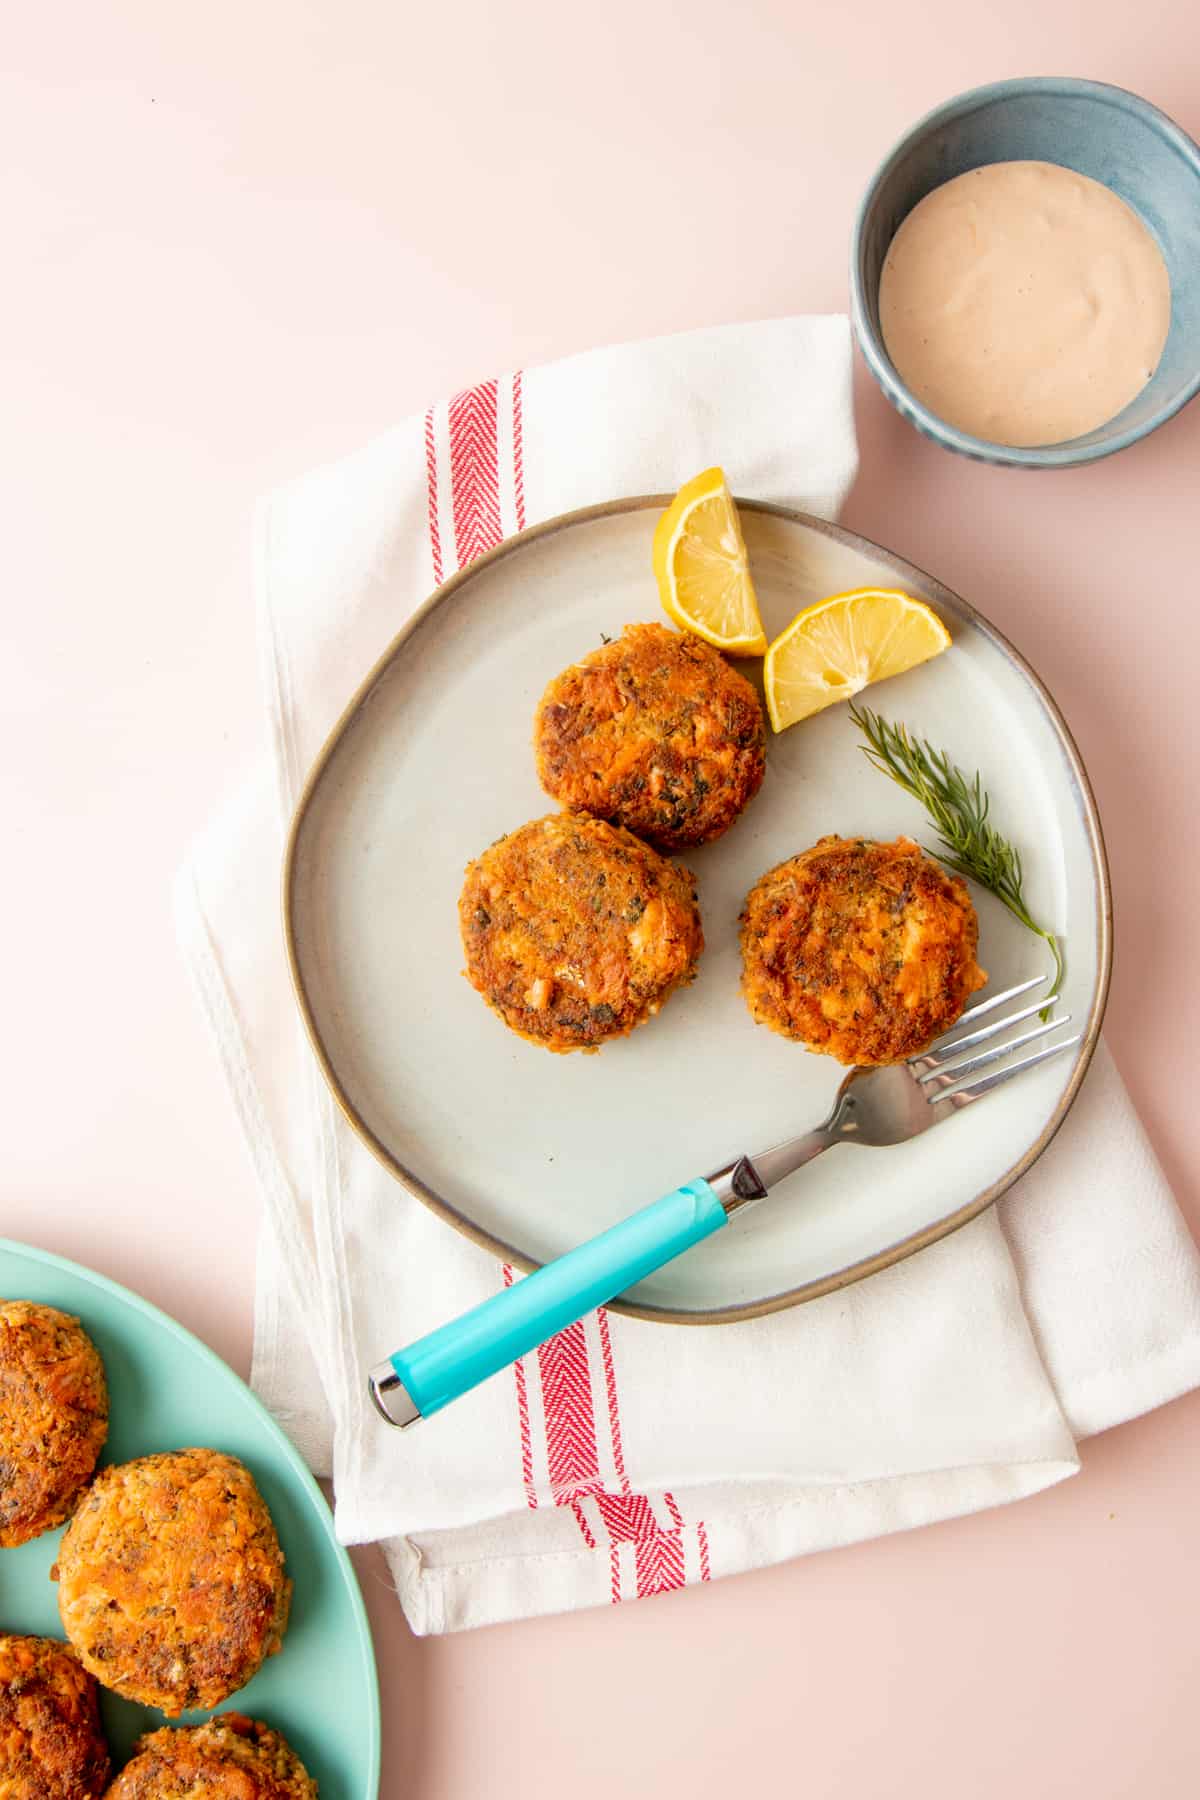 A plate of three salmon patties sits on a red and white dishcloth with a fork. A bowl of remoulade sauce sits nearby.